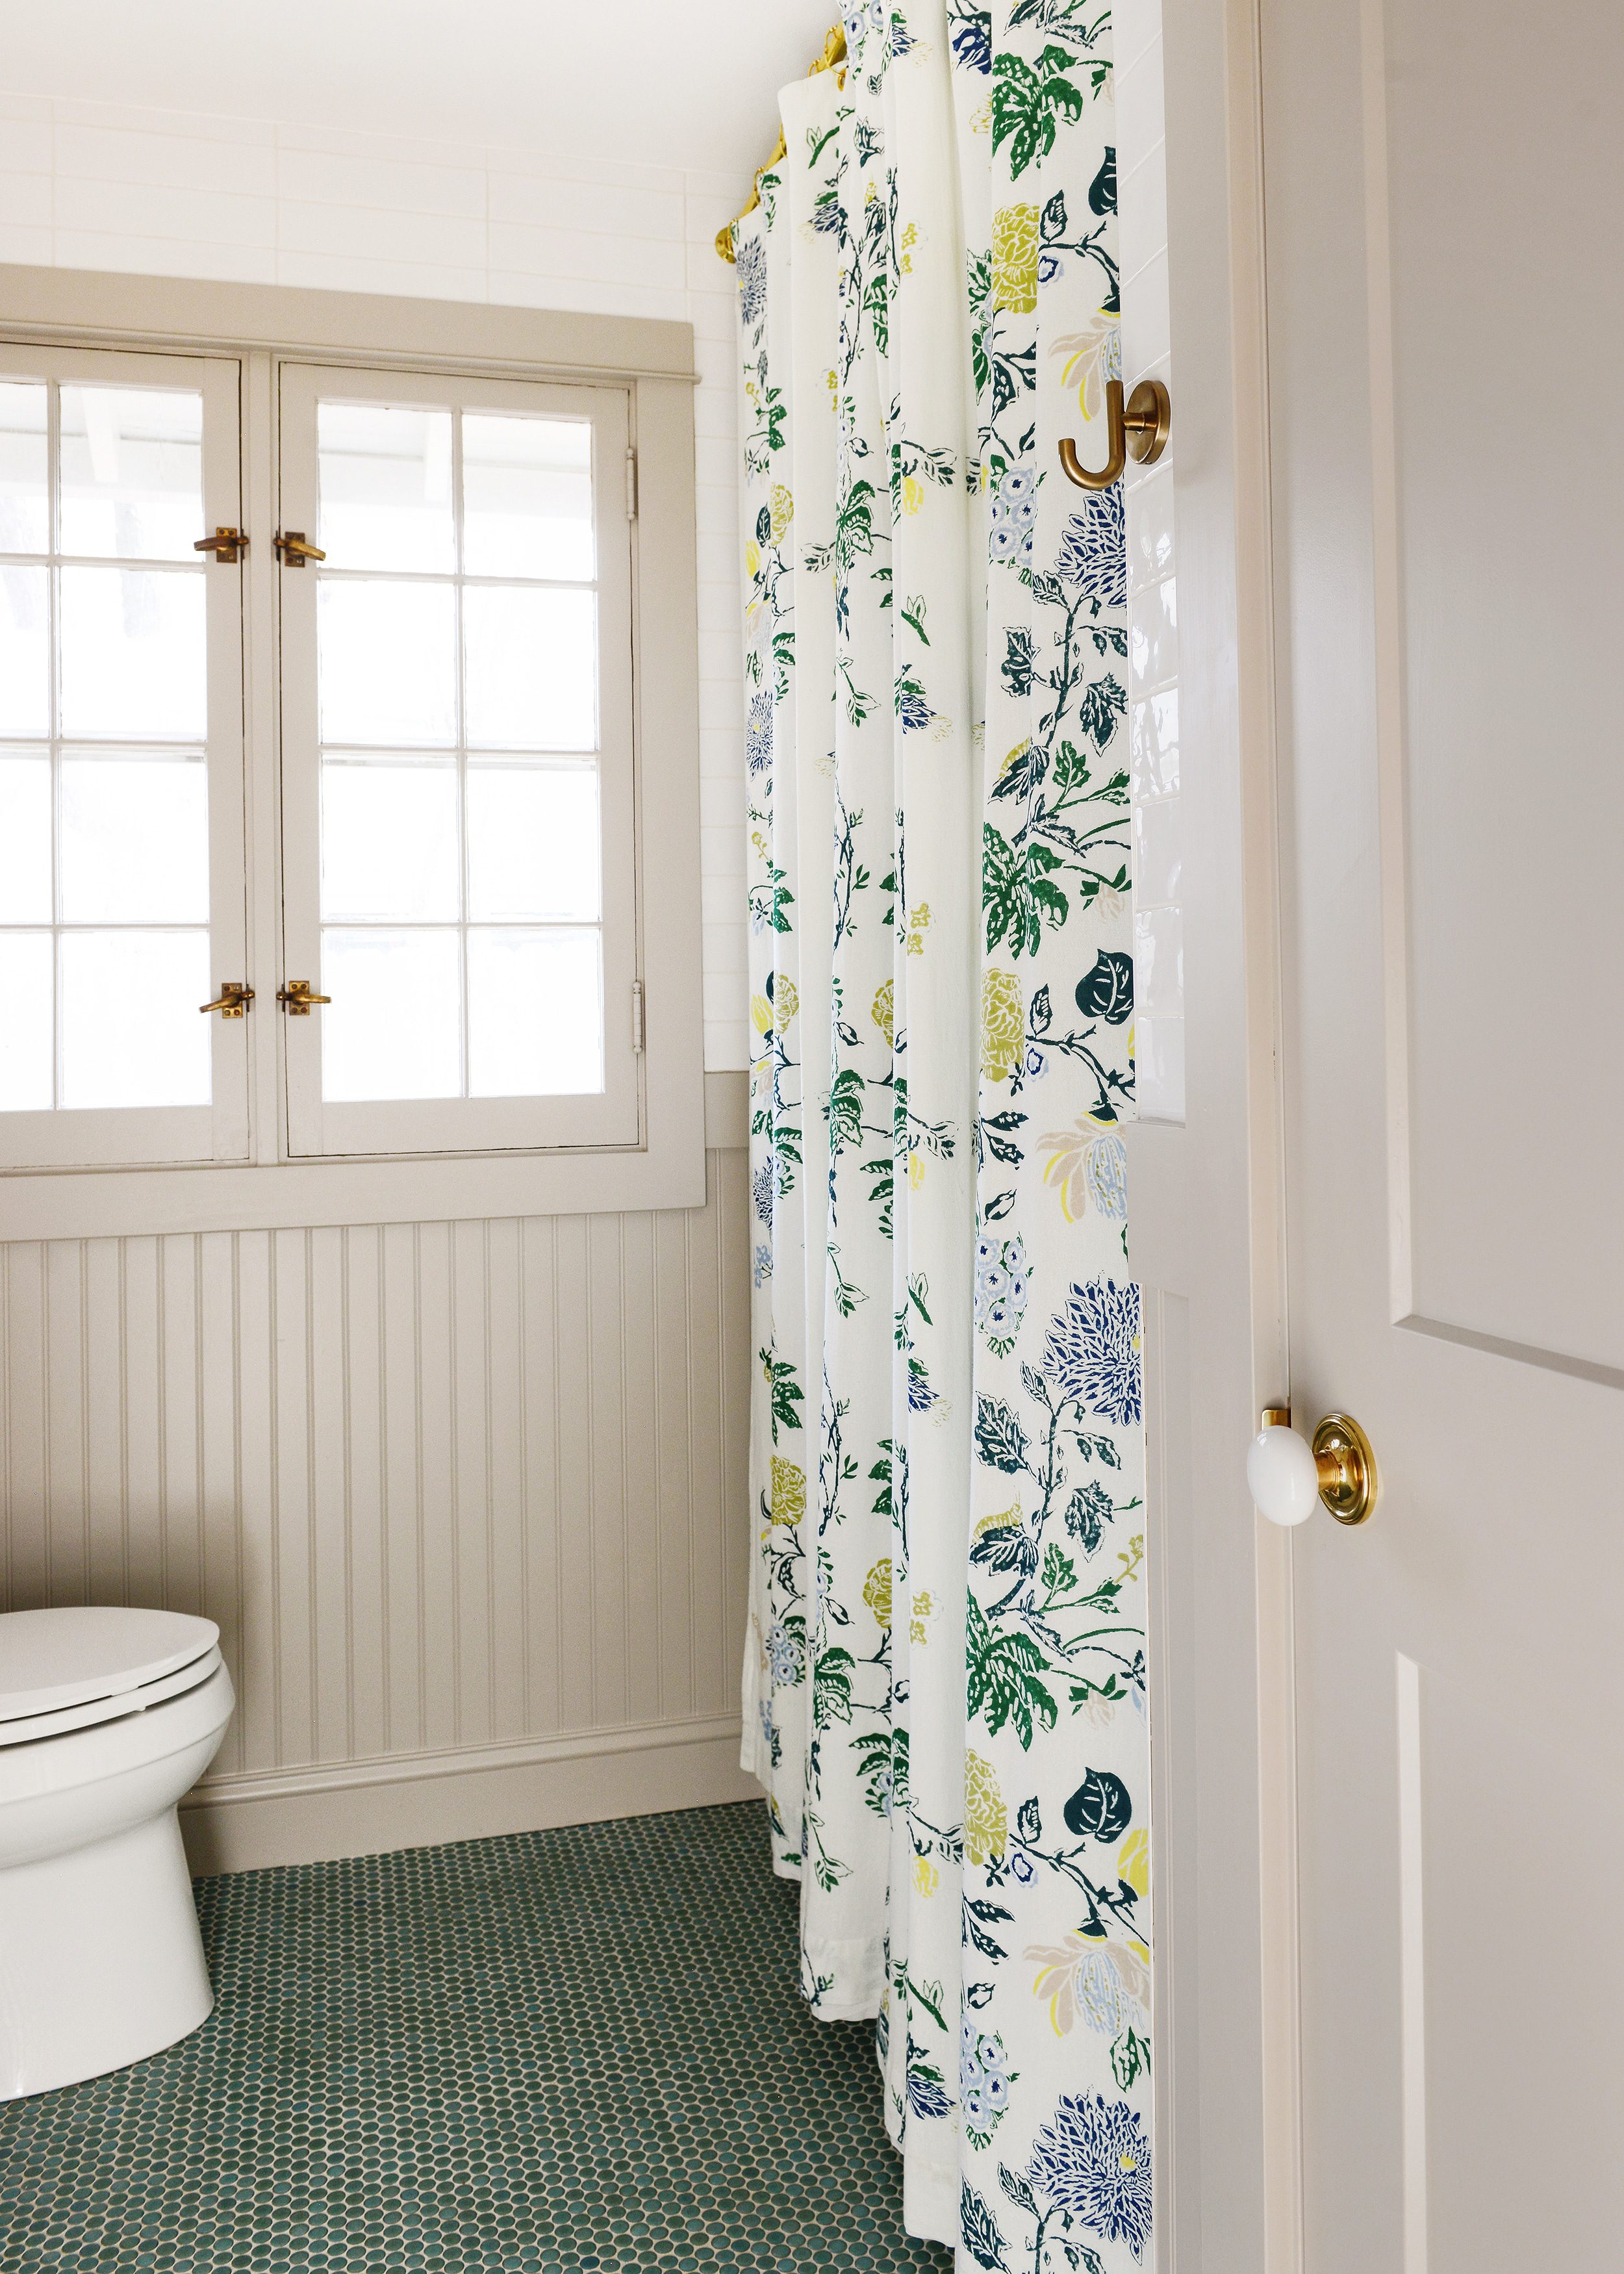 Our extra long shower curtain in our lake house bathroom, featuring green penny tile and greige beadboard | via Yellow Brick Home